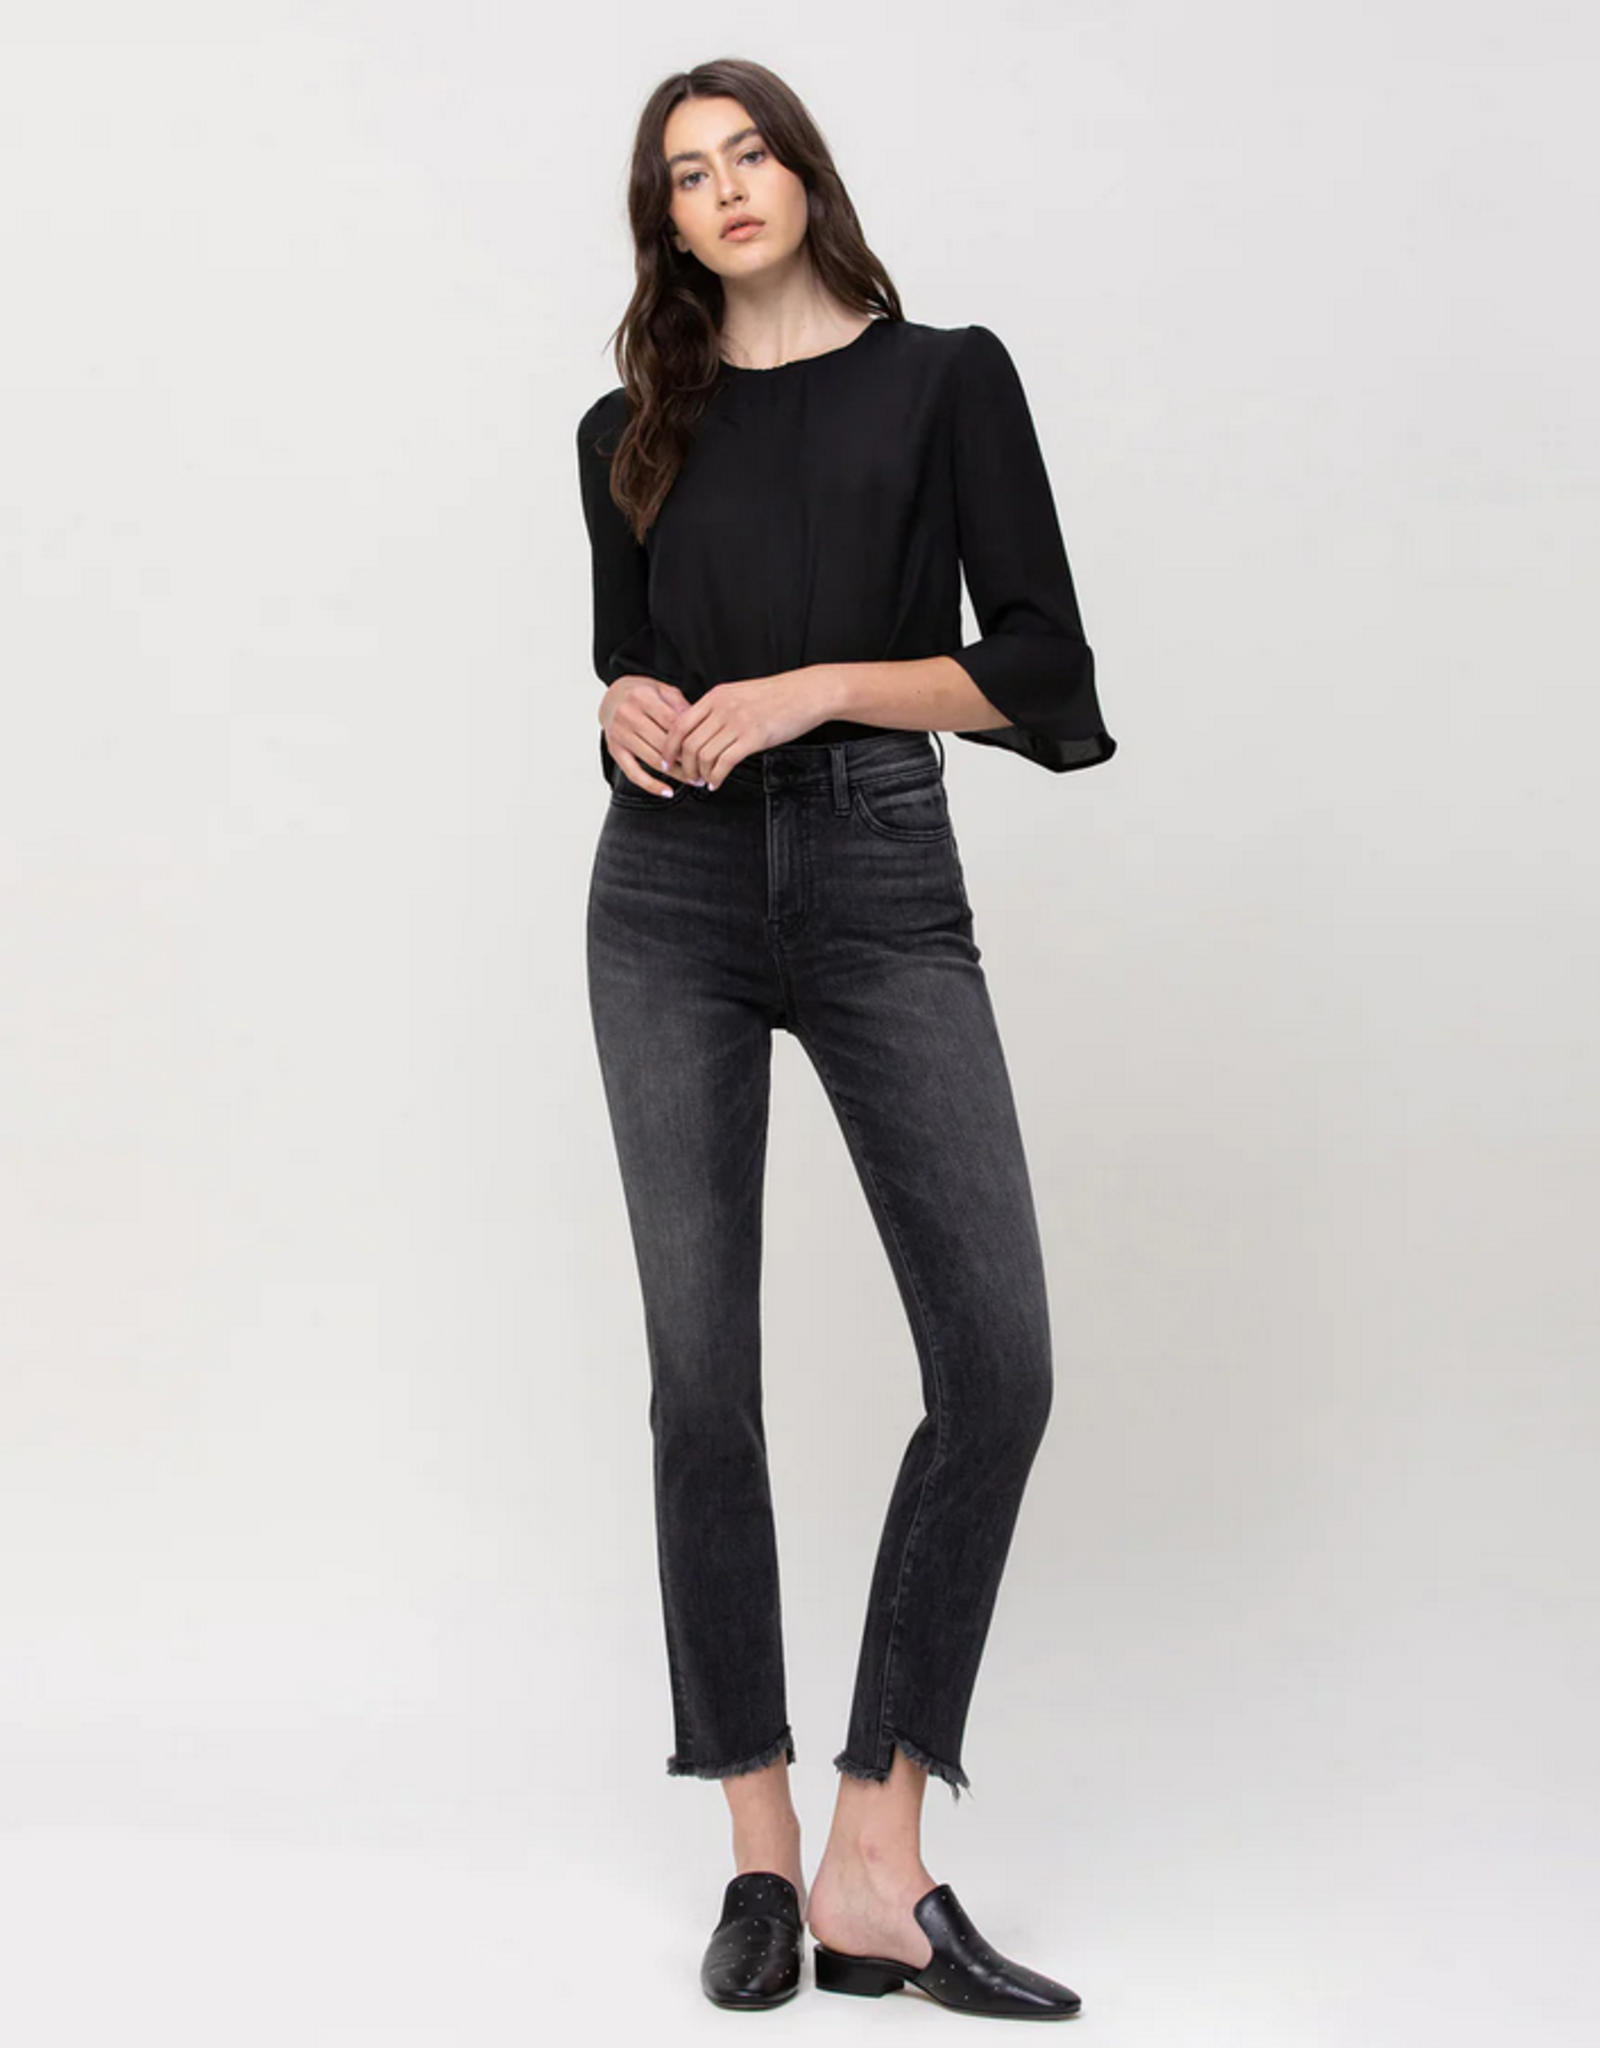 Flying Monkey Delta Dawn - High Rise Straight Crop Jeans with Uneven Hem